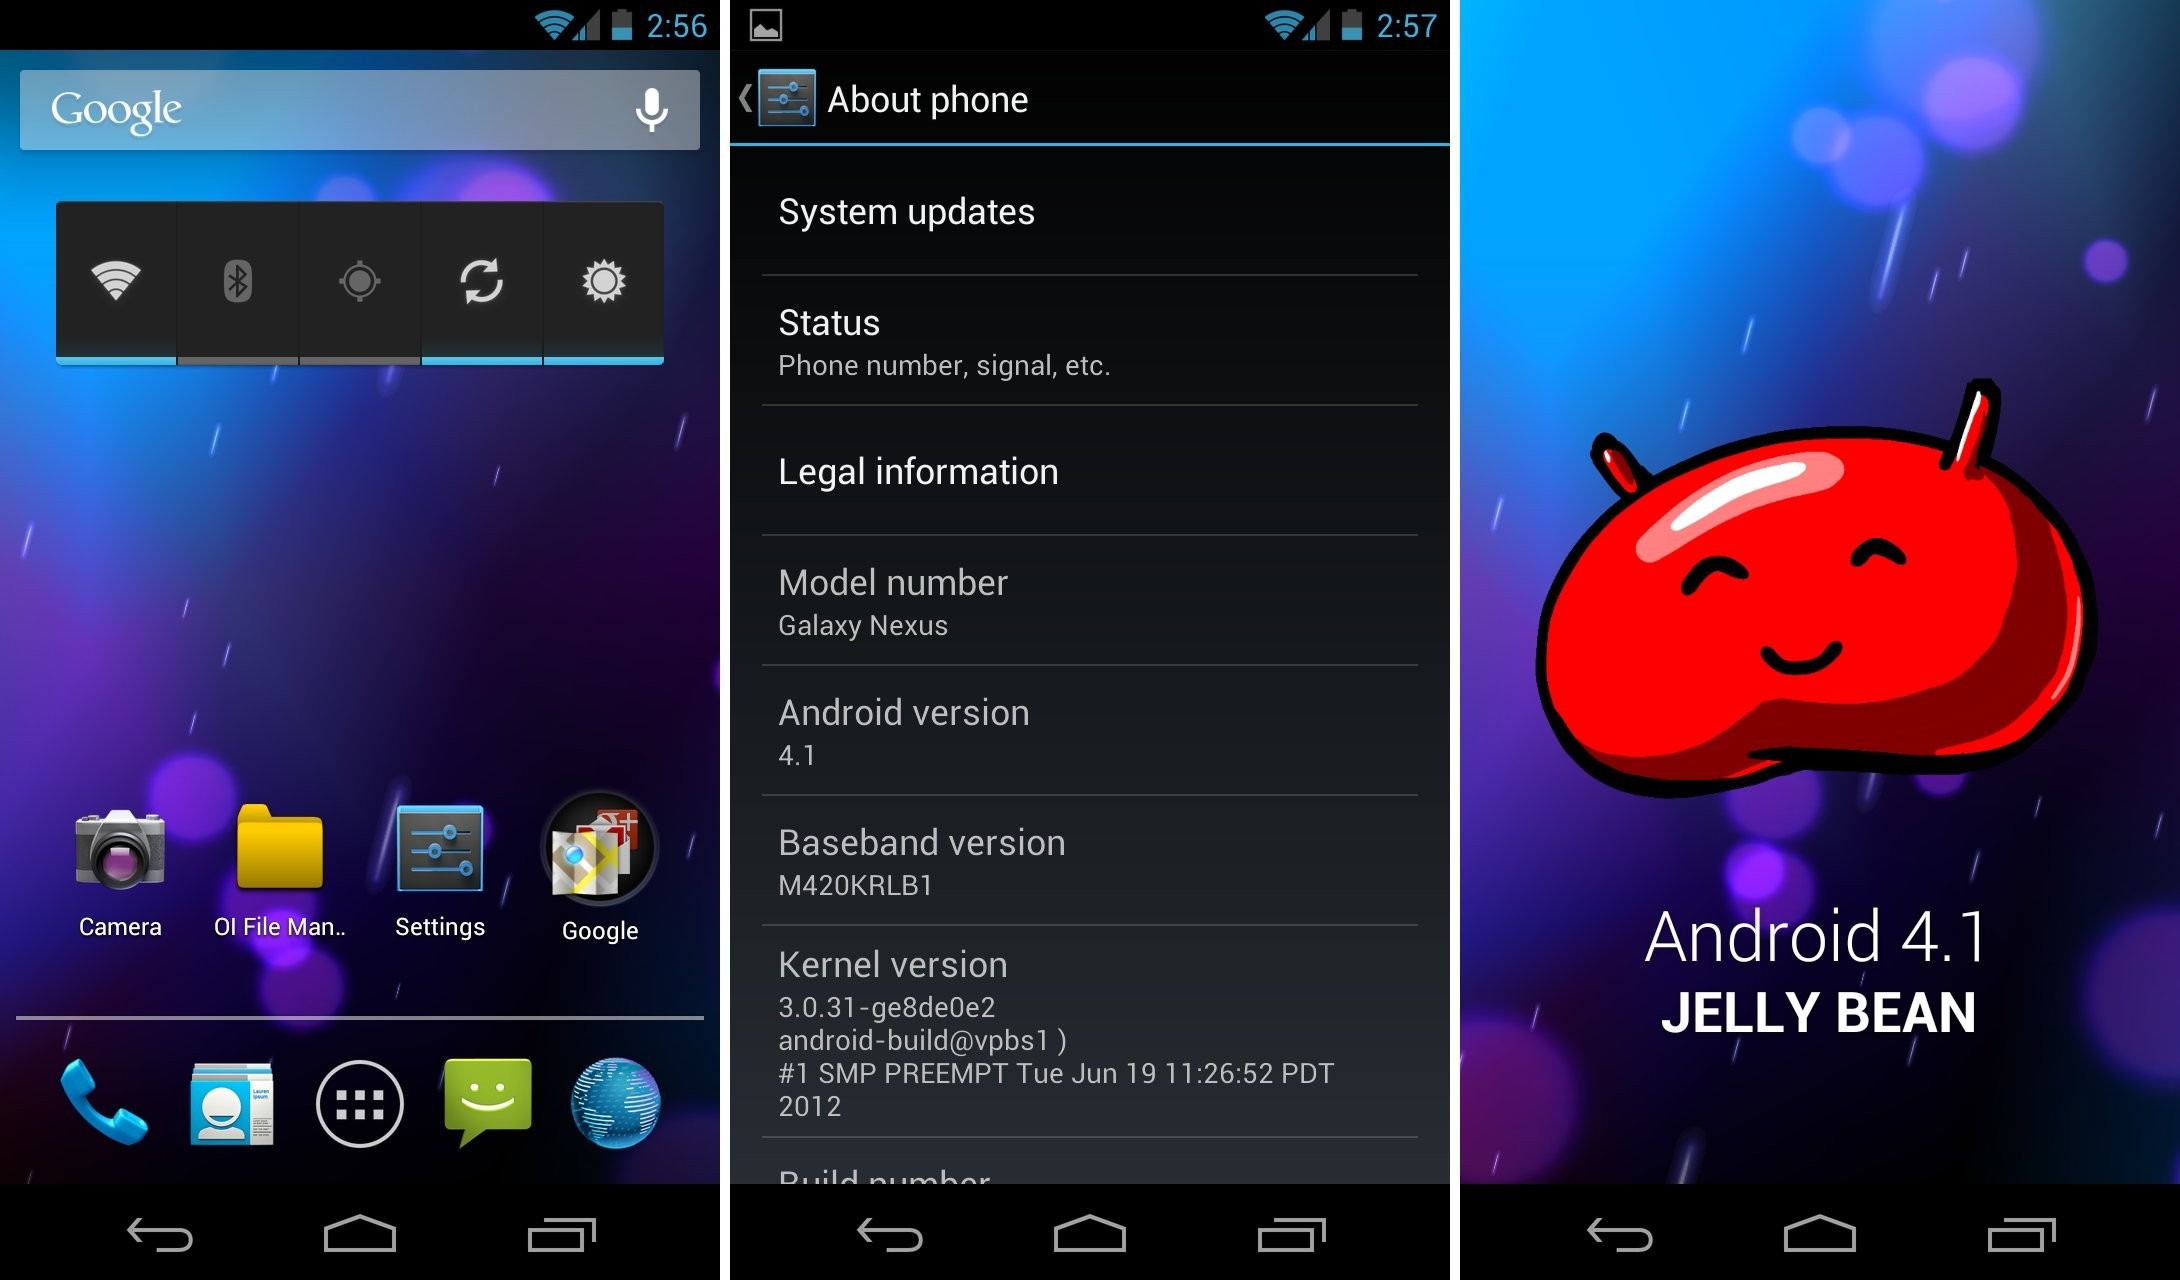 android-jelly-bean-problems-what-users-complain-about-most